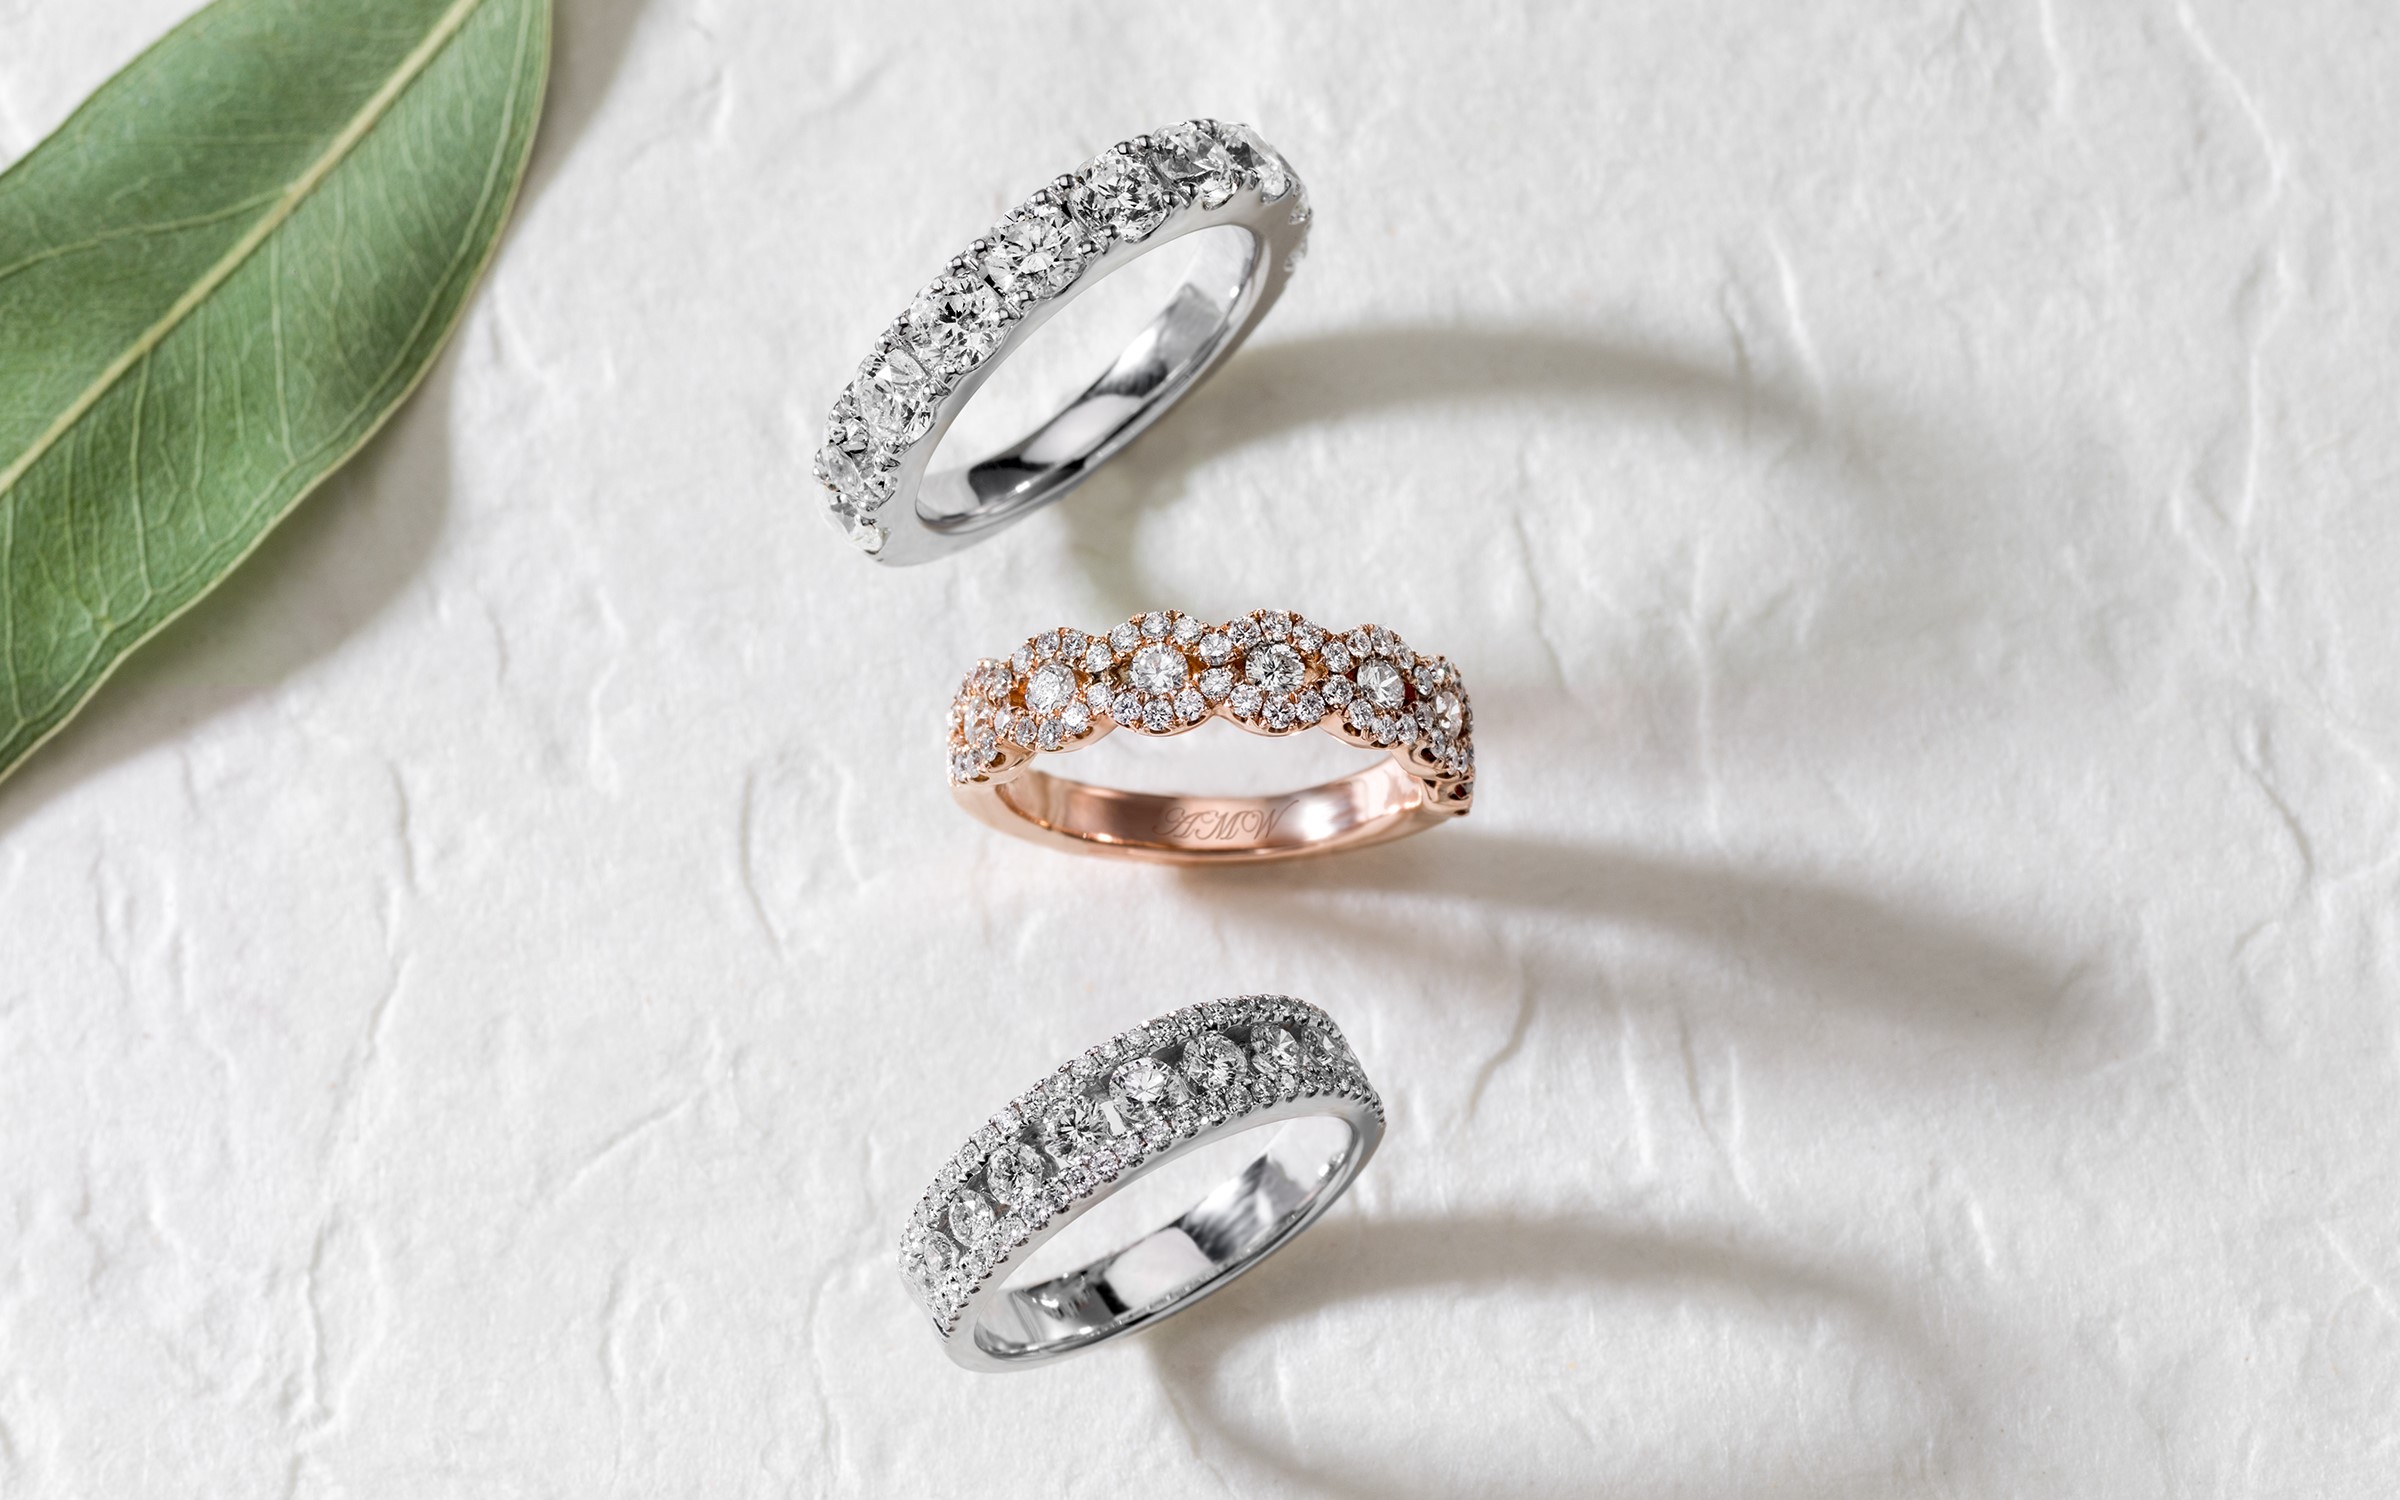 How to Customize Your Engagement Ring